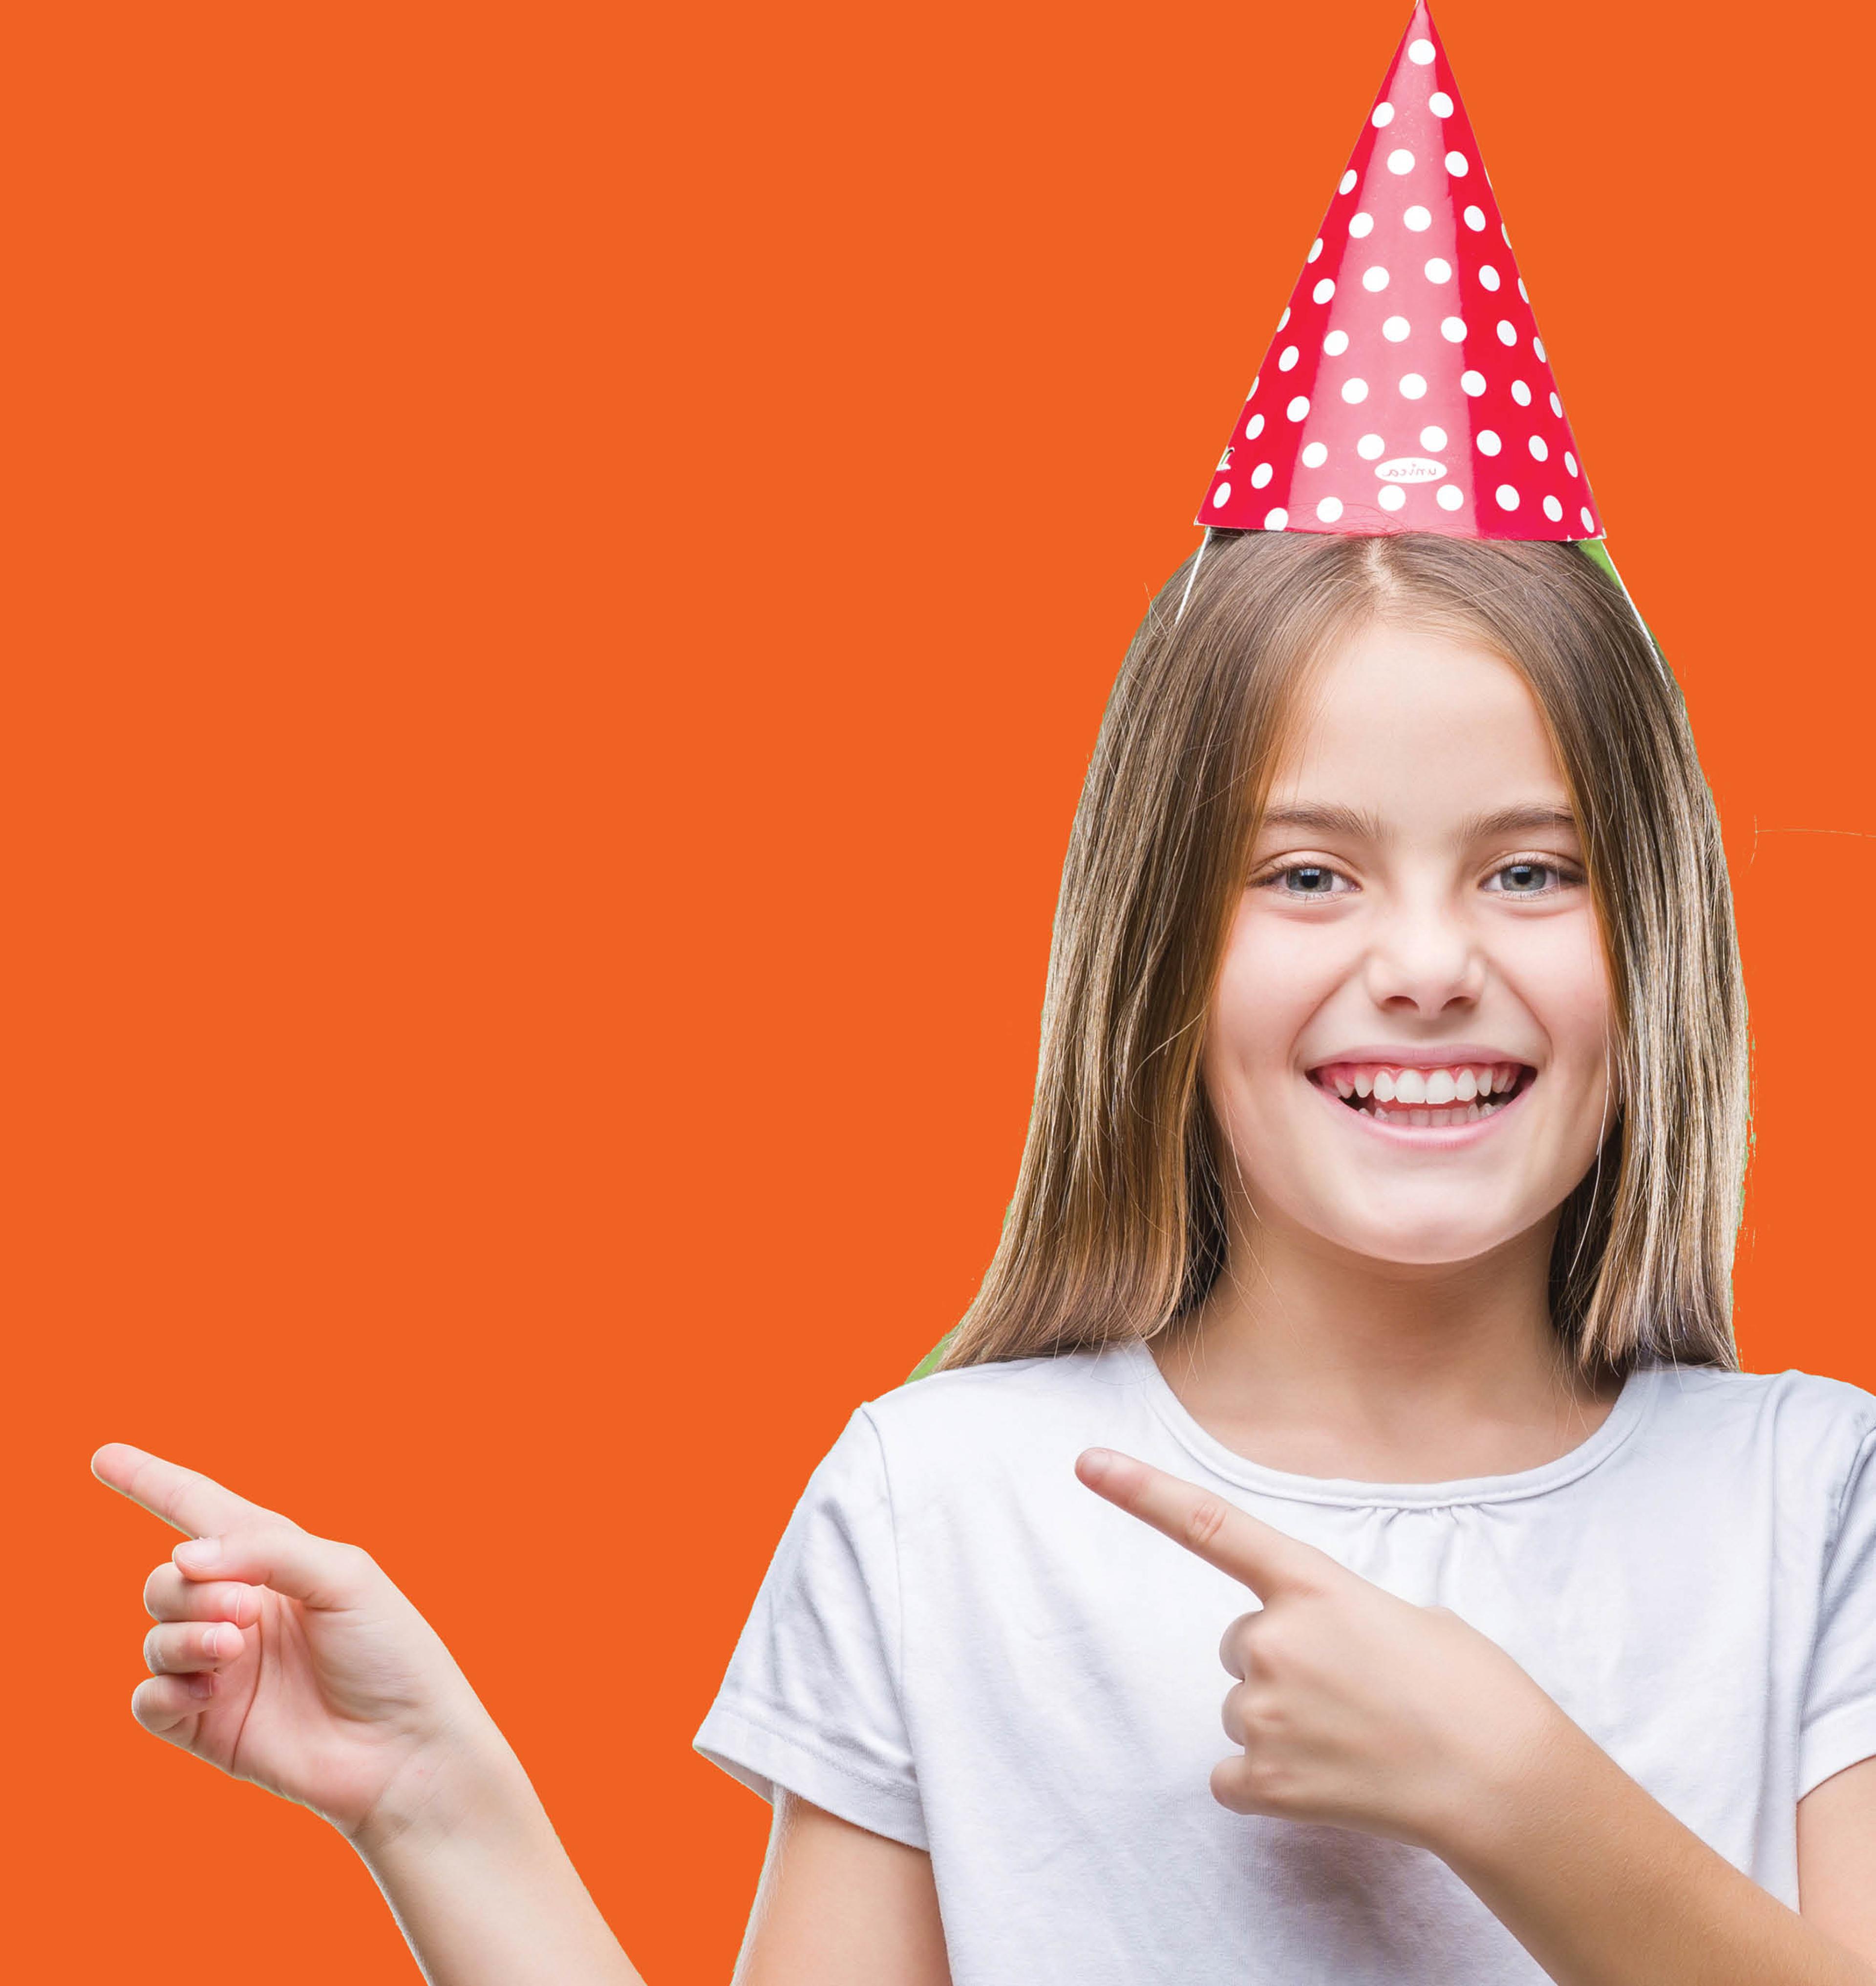 Smiling female child wearing a party hat on a bright orange background.